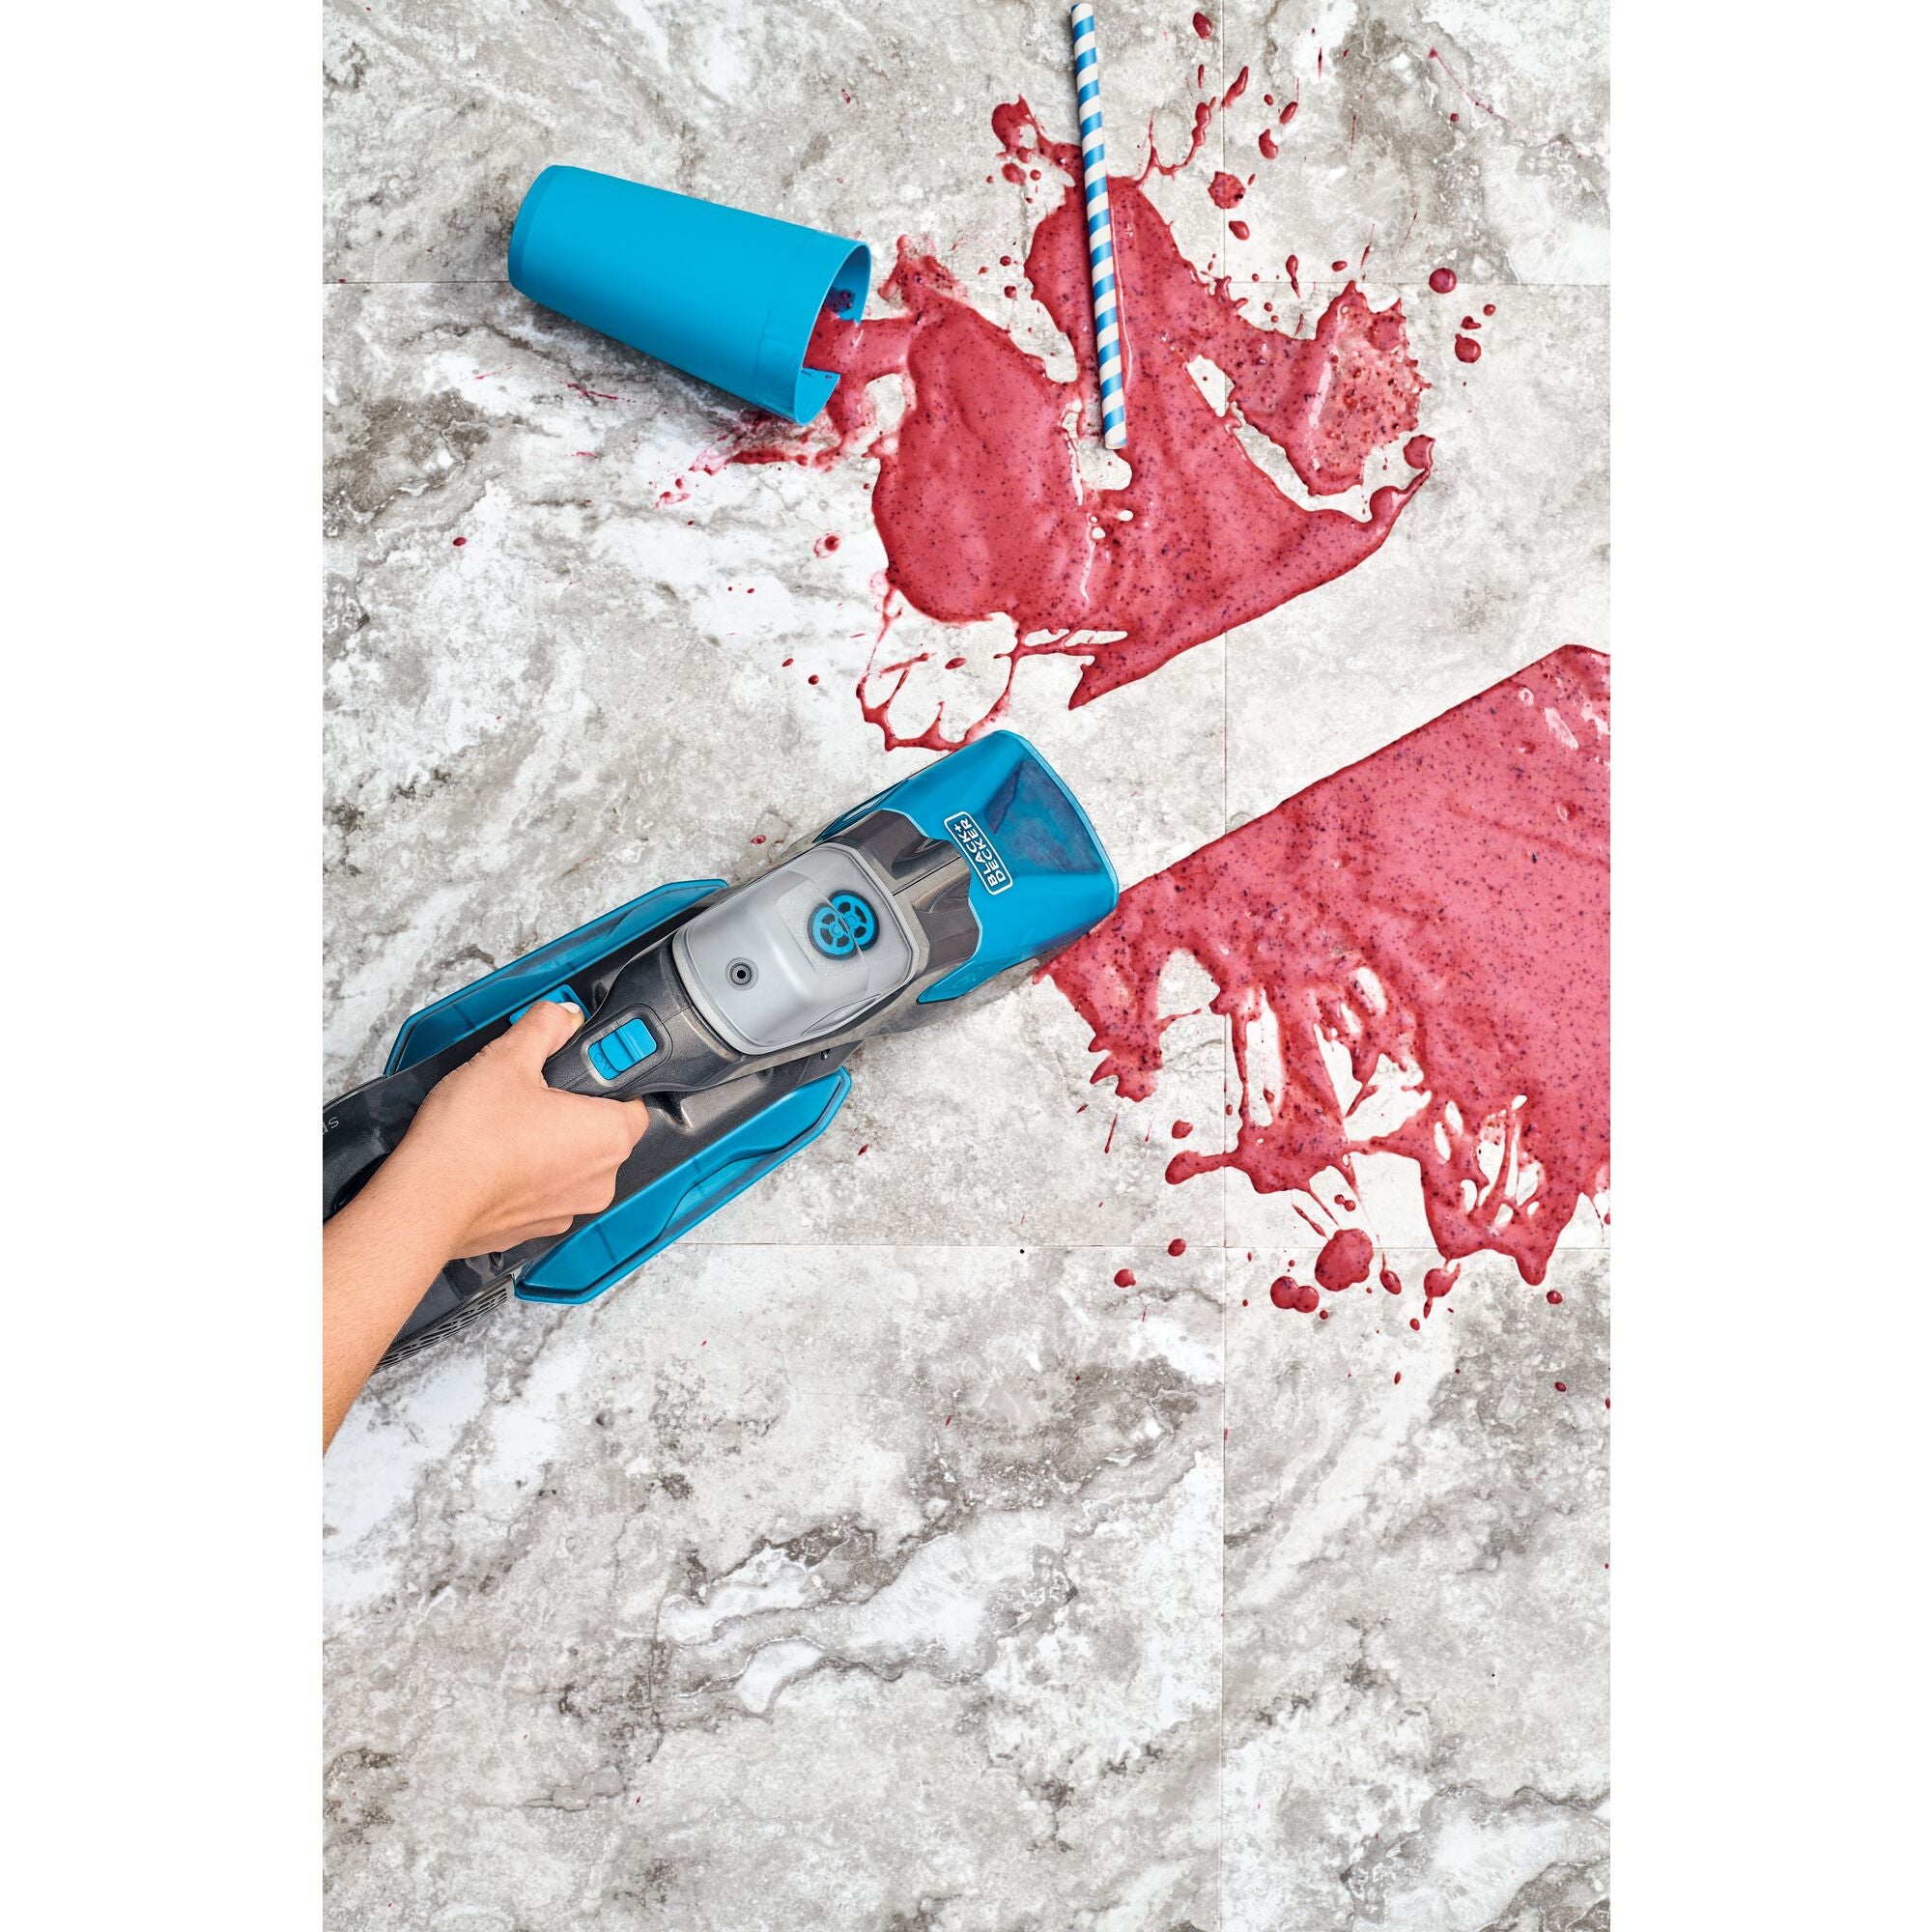 Spillbuster cordless spill plus spot cleaner being used to clean floor.